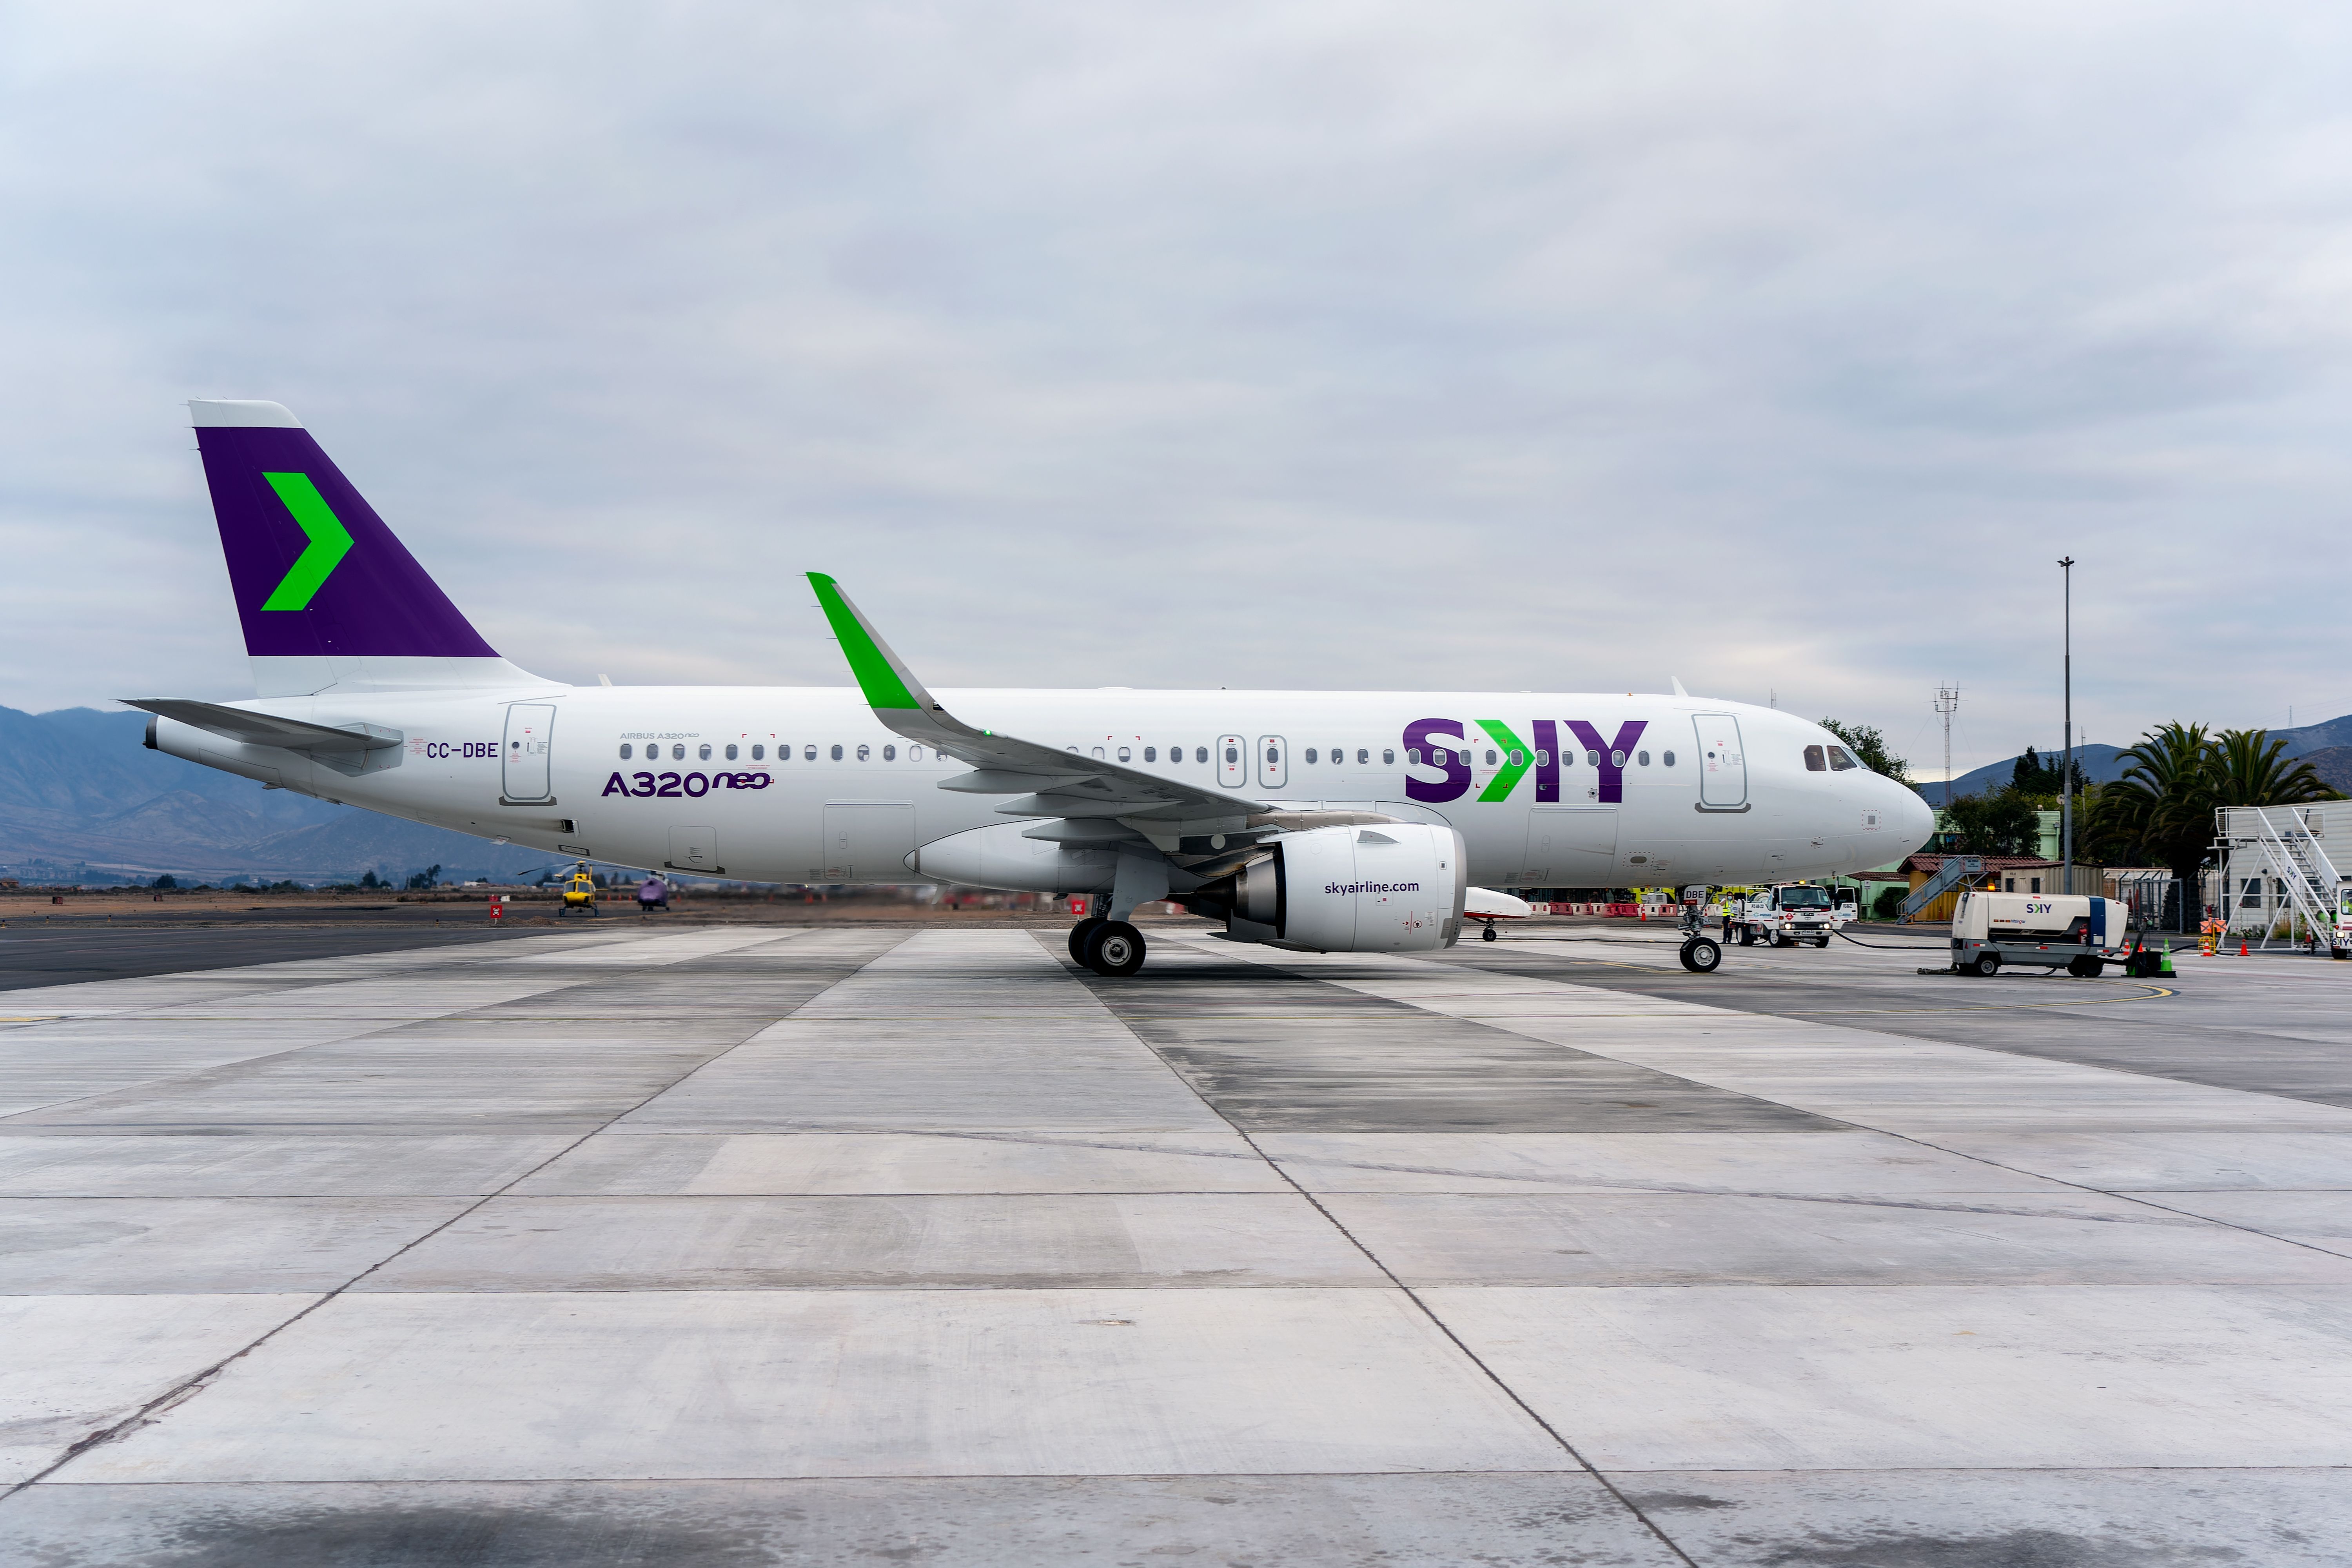 A Sky Airline Airbus A320neo aircraft parked in La Serena, Chile.